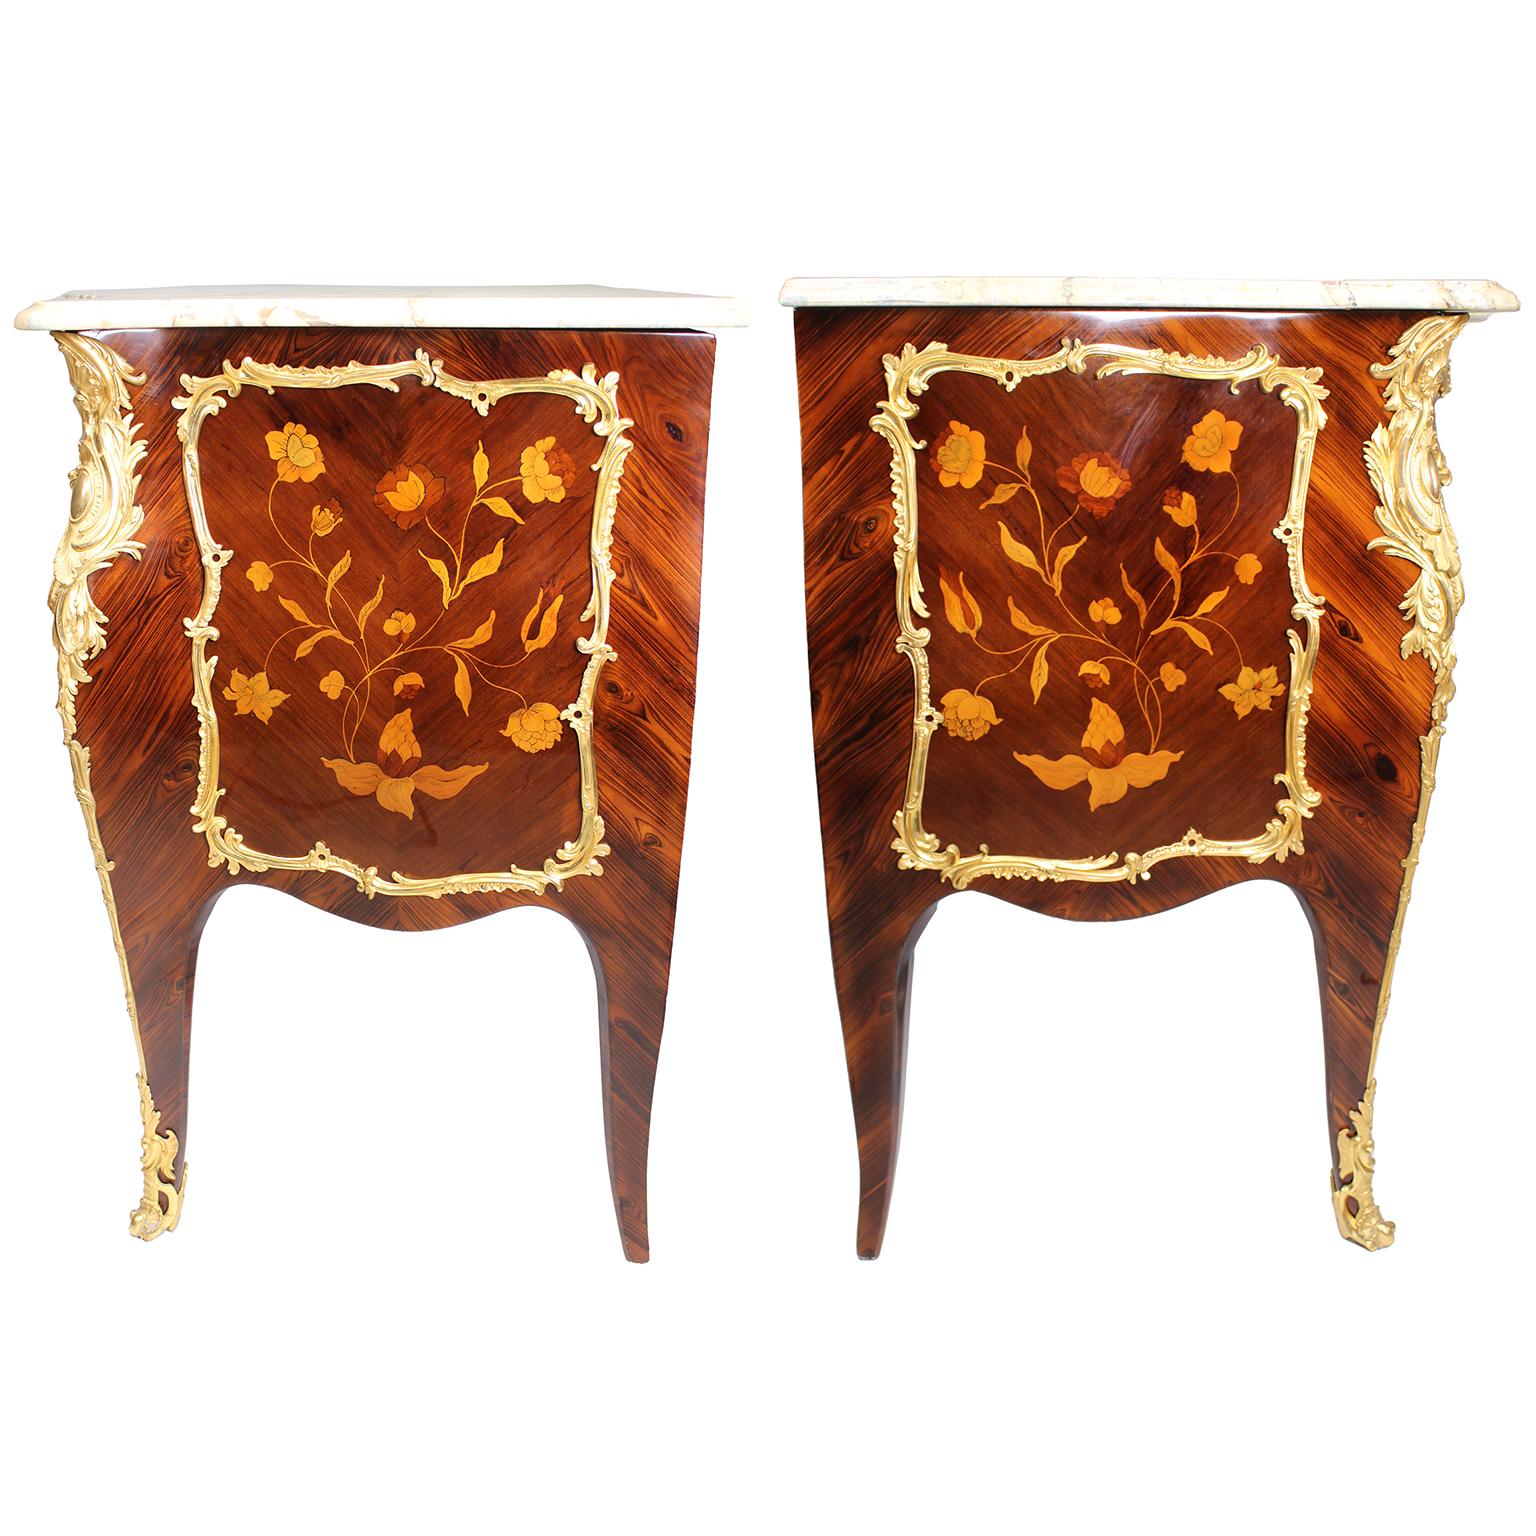 Fine Pair French 19th Century Louis XV Style Gilt-Bronze & Marquetry Commodes For Sale 12